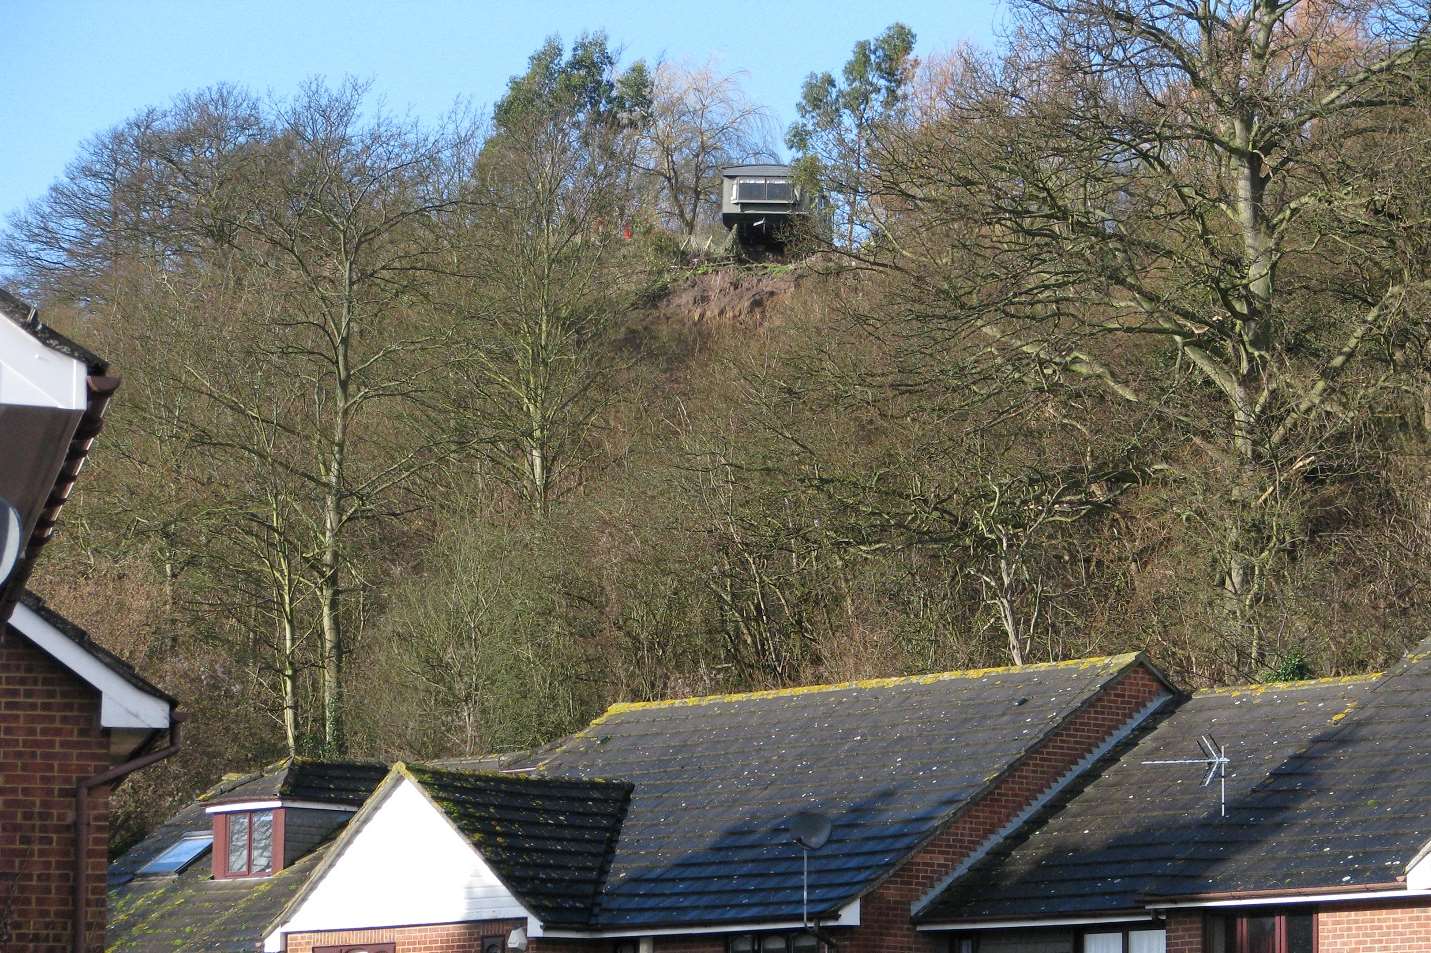 This caravan was left hanging precariously above Lower Upnor after a cliff edge fell away